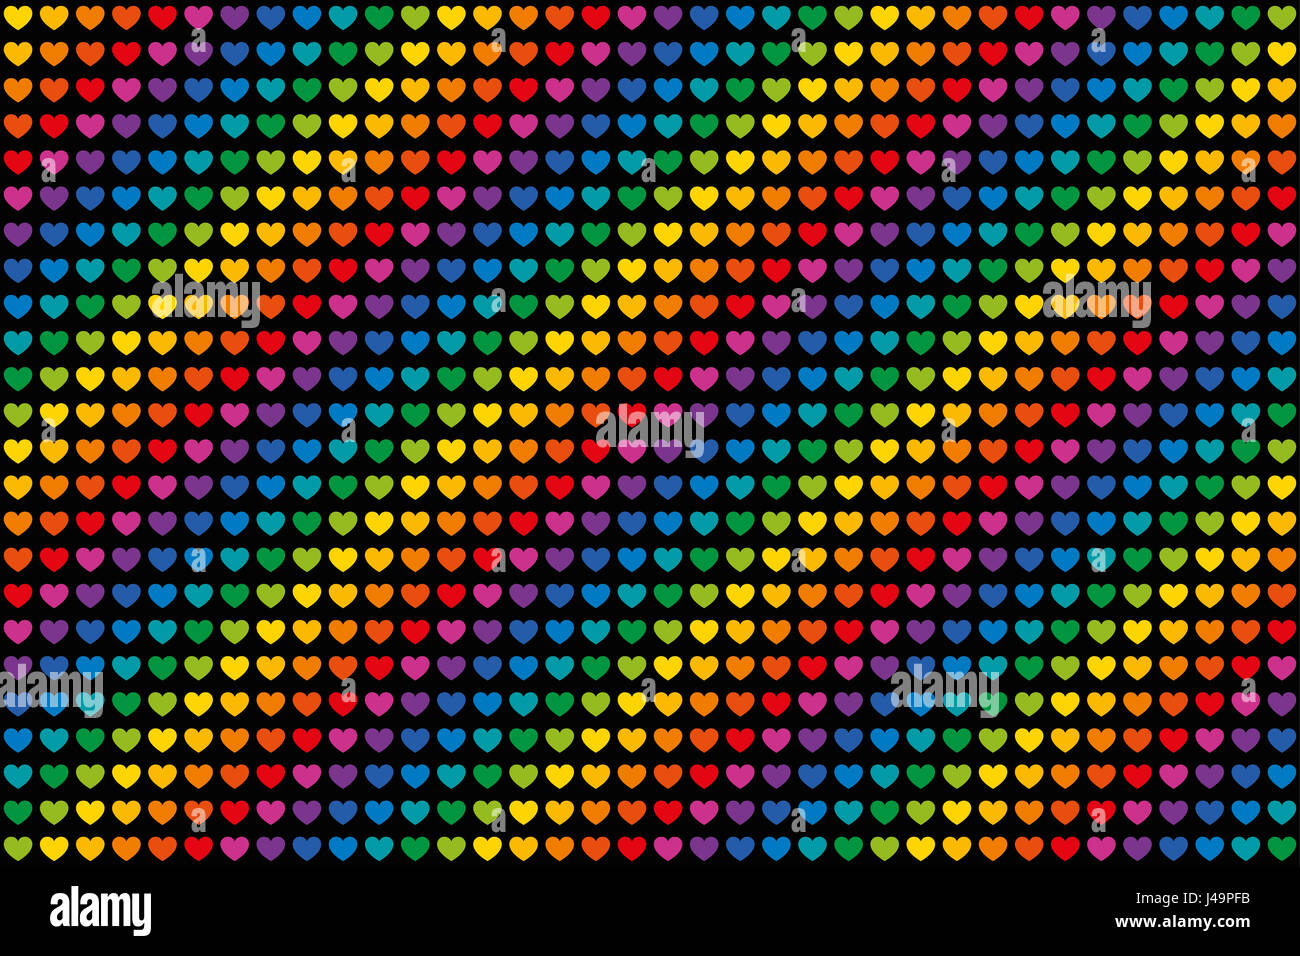 Rainbow colored hearts pattern endless tile. Heart symbols in twelve unique color hues. Can be used as endless background or wallpaper. Stock Photo